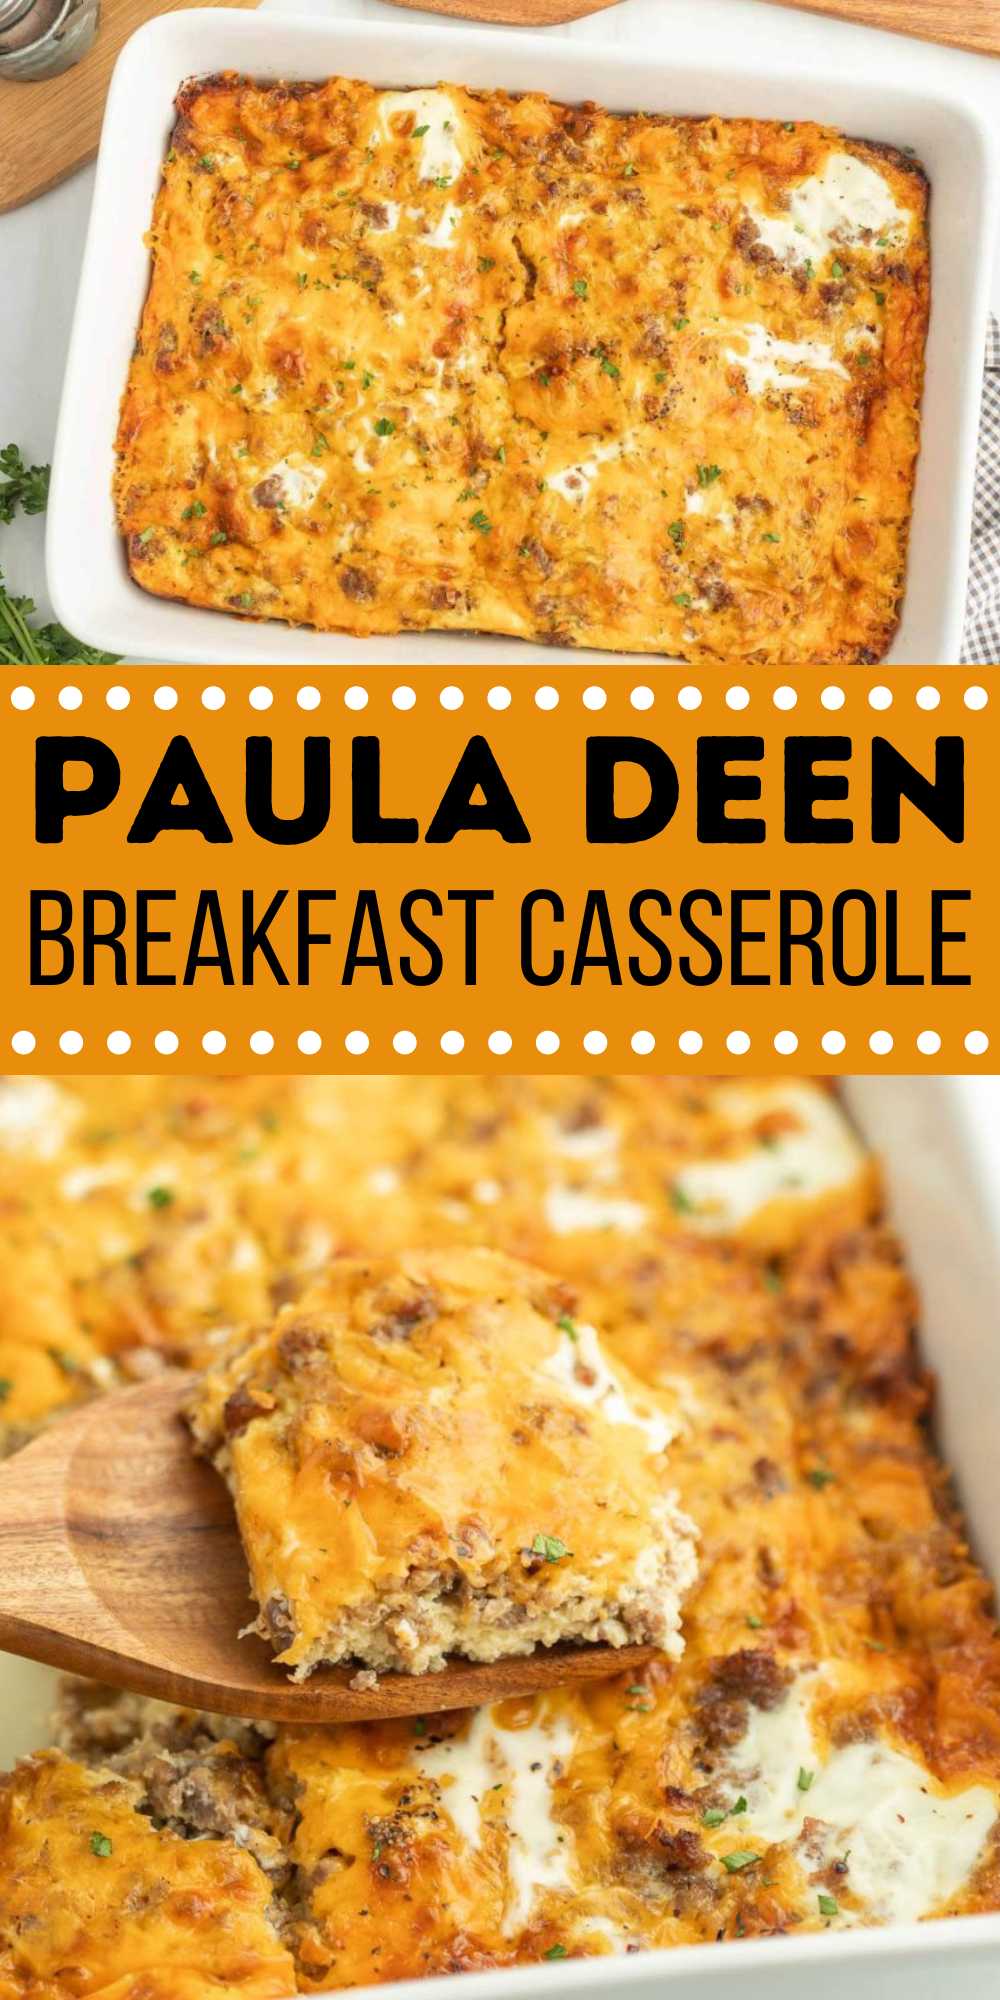 Paula Deen Breakfast Casserole is a delicious casserole that is loaded with easy ingredients. Perfect for a weekend breakfast. This copycat breakfast casserole is layered with delicious ingredients. The ingredients are simple and you can easily make ahead of time. #eatingonadime #pauladeenbreakfastcasserole #breakfastcasserole #copycatrecipes